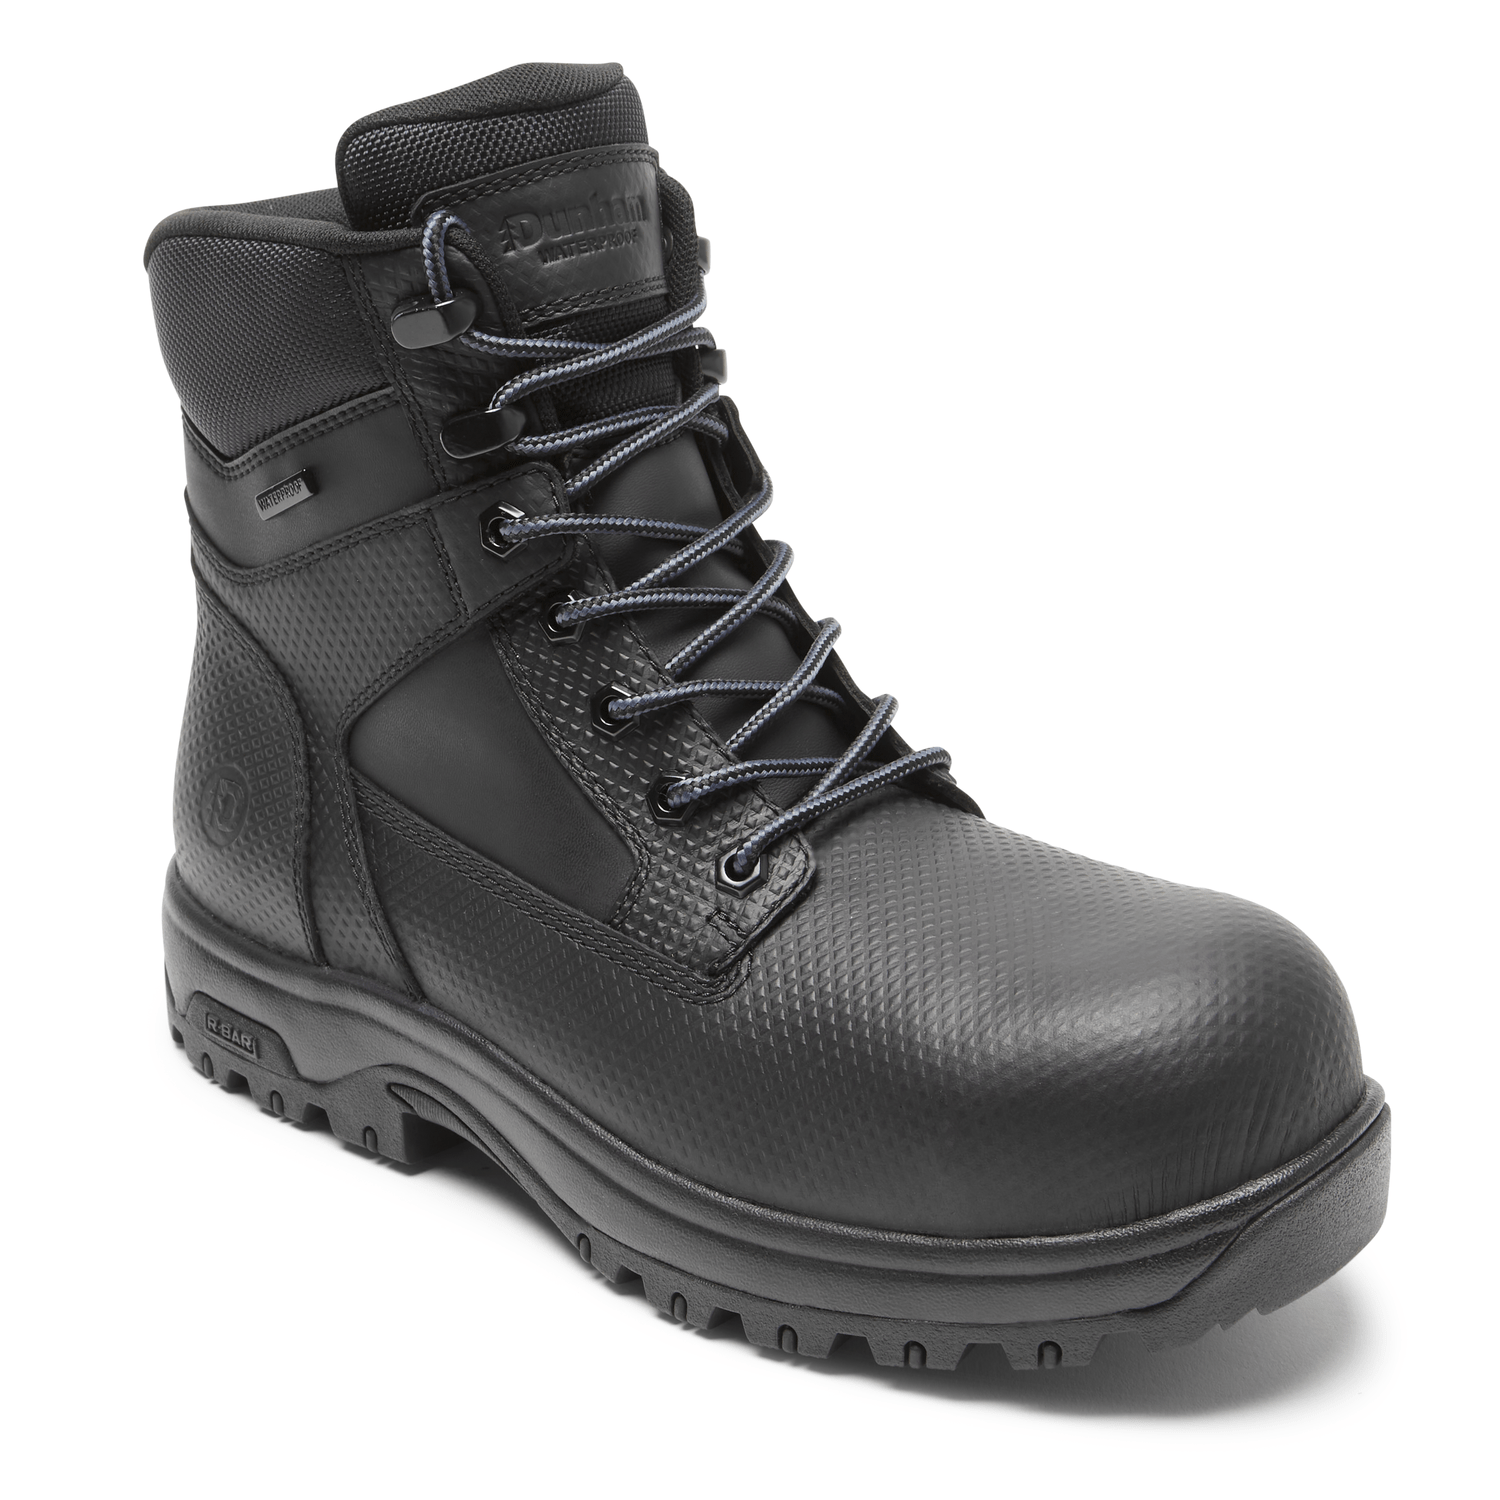 8000Works Safety Plain Toe Boot – Waterproof product image